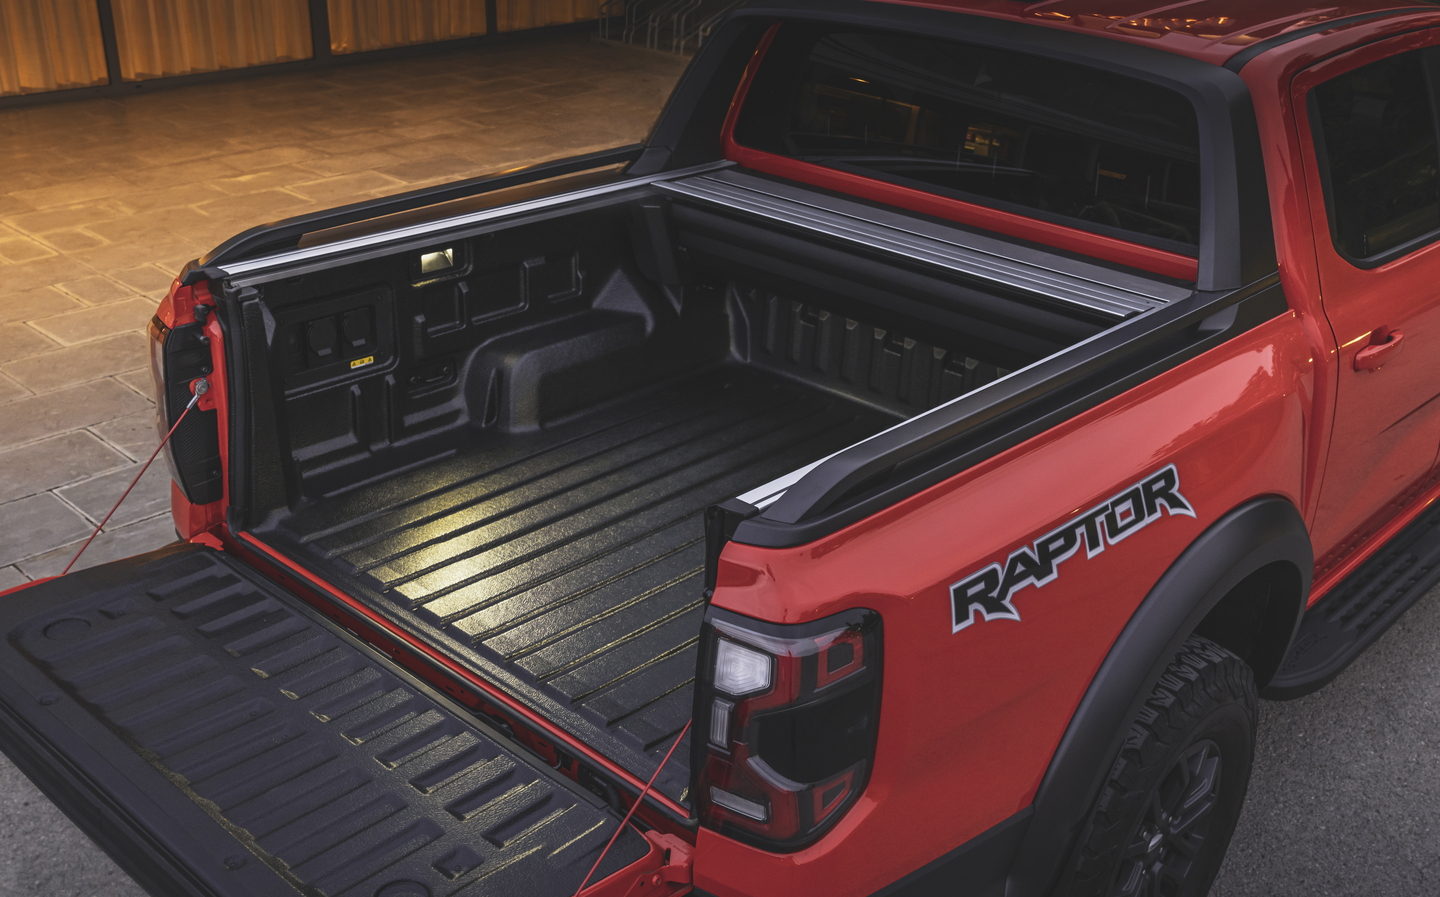 Ford Ranger Raptor 2022 review: American looks, brawny engine and